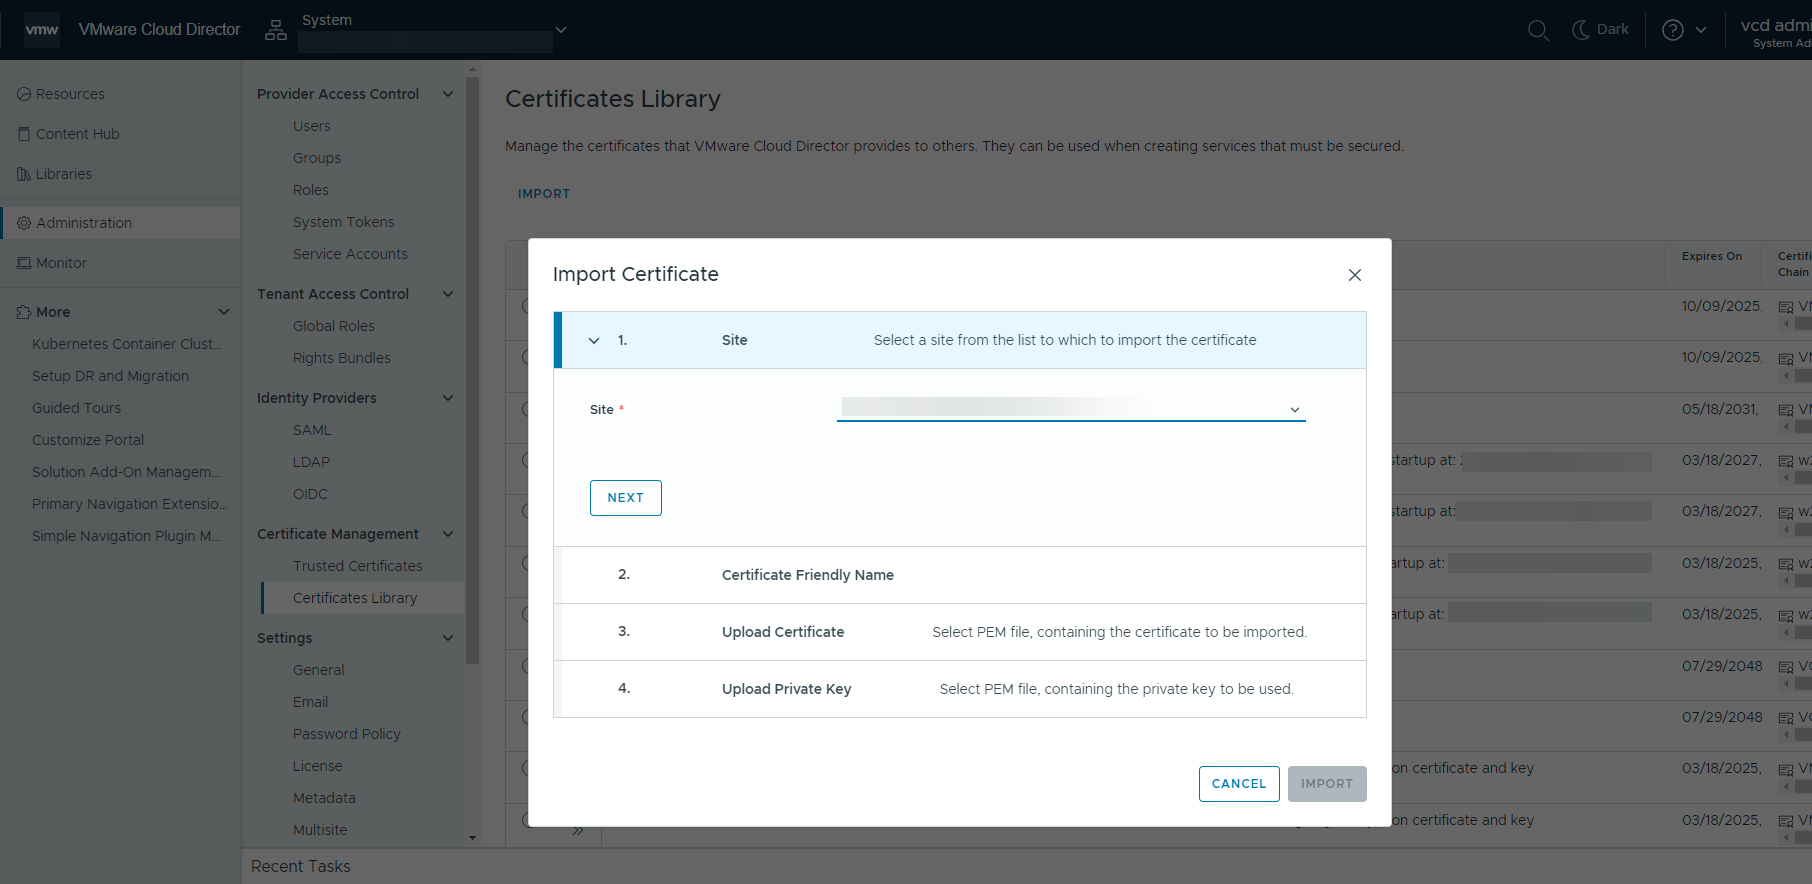 You can import a certificate by entering a friendly name and uploading a certificate and private key.